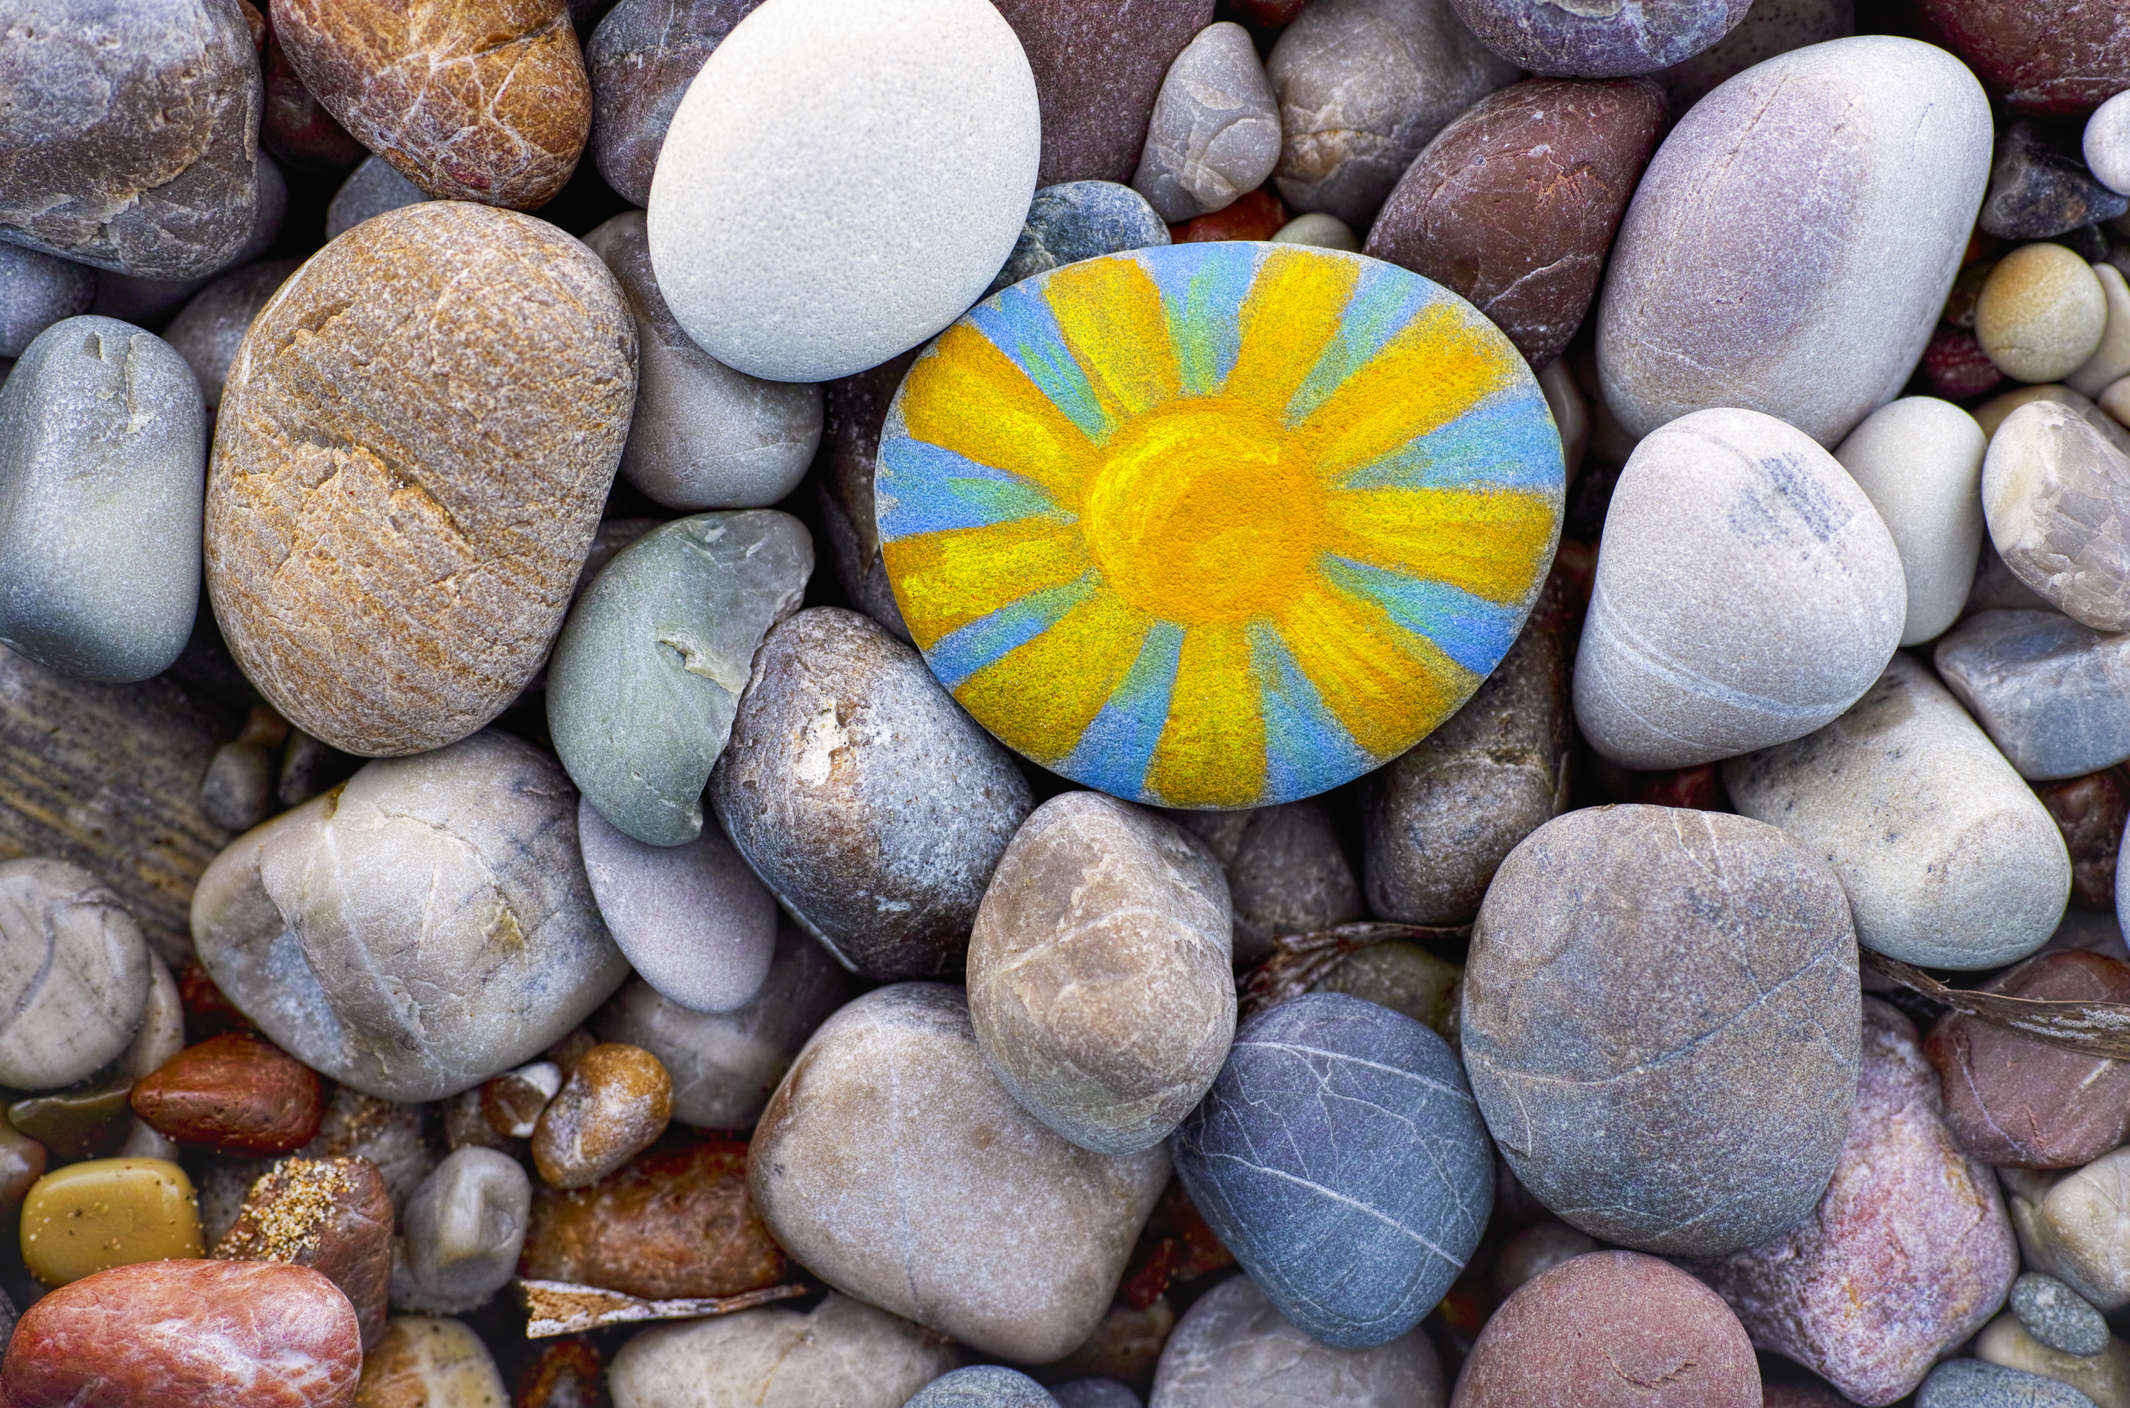 a close up of beach pebbles with one painted blue and yellow in the pattern of a sun